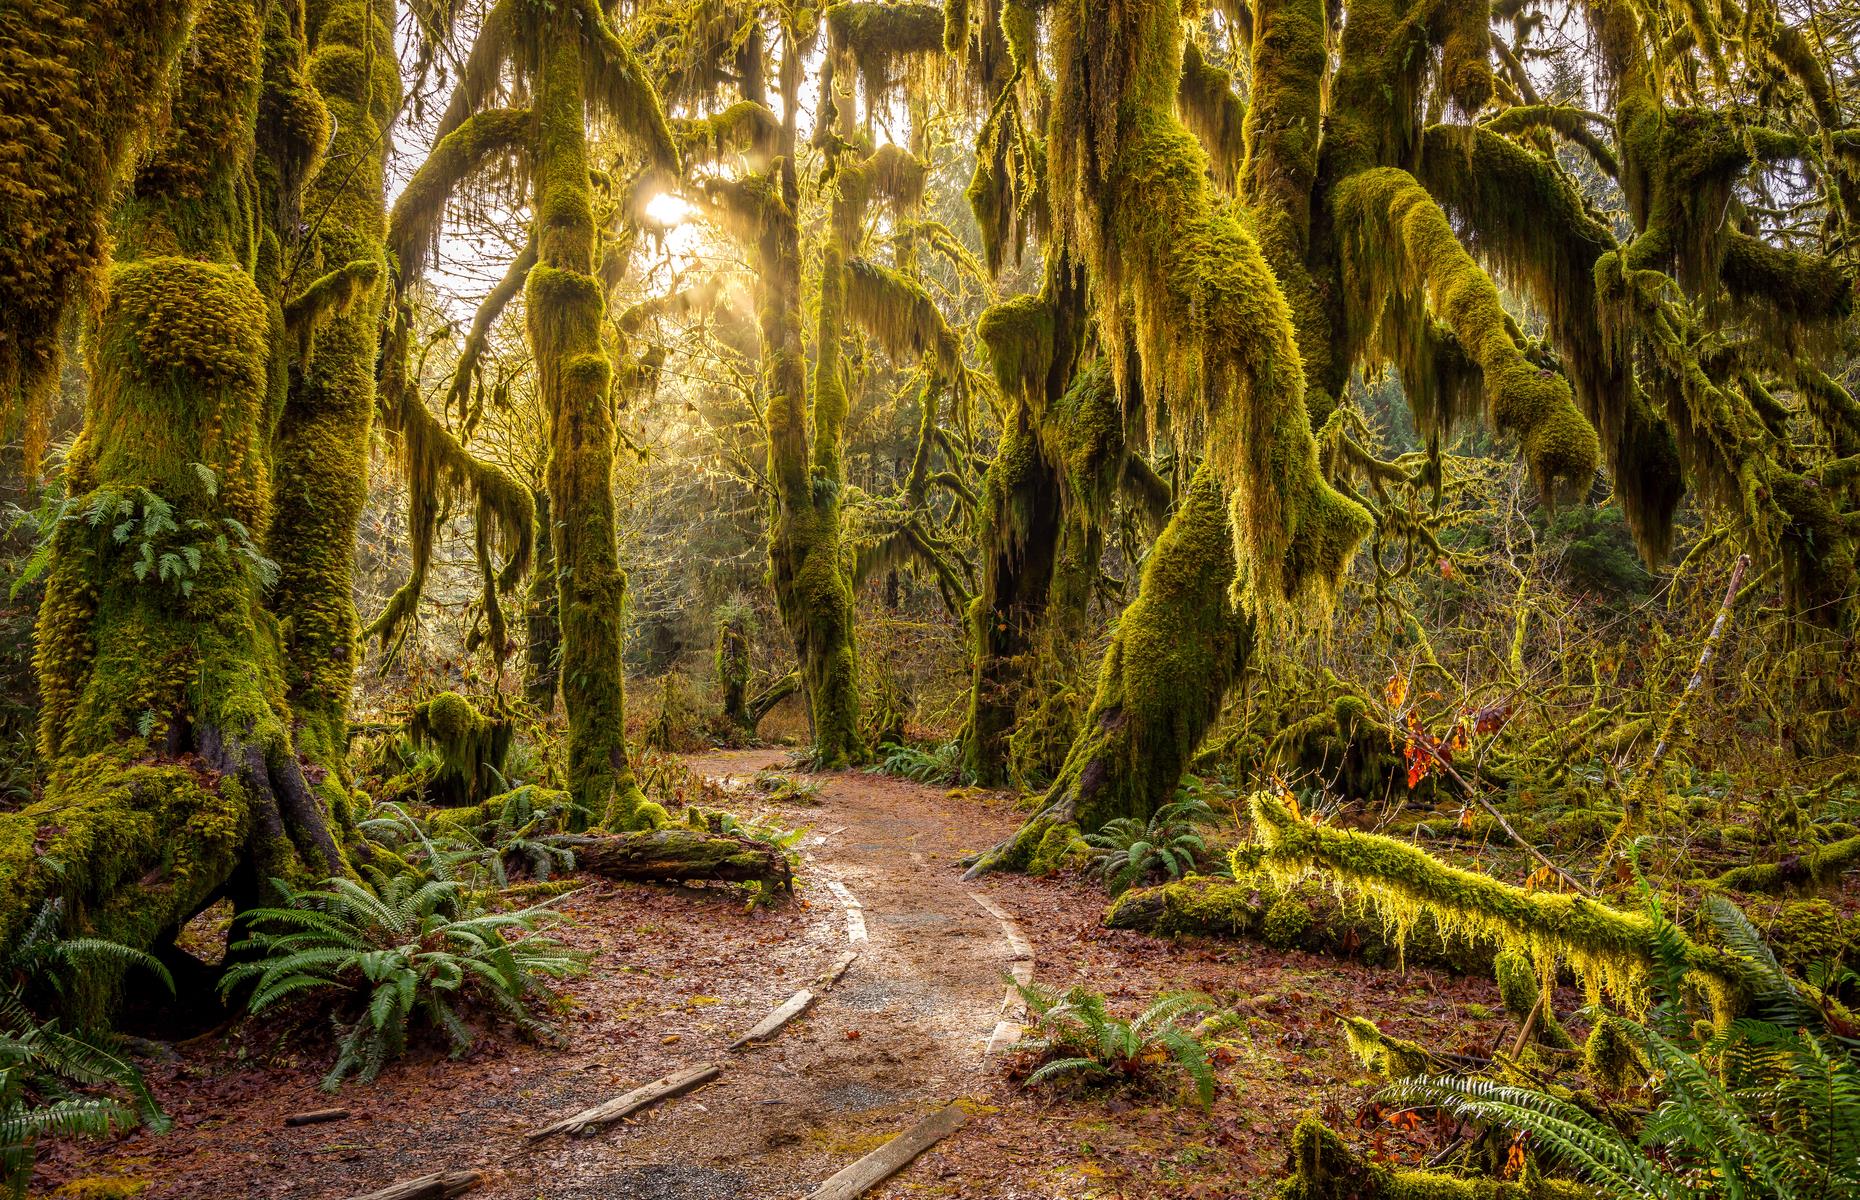 <p><a href="https://www.nps.gov/olym/">Olympic National Park</a> is rich in natural beauty, from glacier-capped mountains and dark-honey beaches to natural hot springs. But arguably the most beautiful, and unexpected, part is <a href="https://www.nps.gov/olym/planyourvisit/visiting-the-hoh.htm">Hoh Rain Forest</a>, where old-growth trees are shrouded in vivid emerald moss. Two trails run from the visitor center and, if you want to spend more time in this quietly magical place, you can camp overnight.</p>